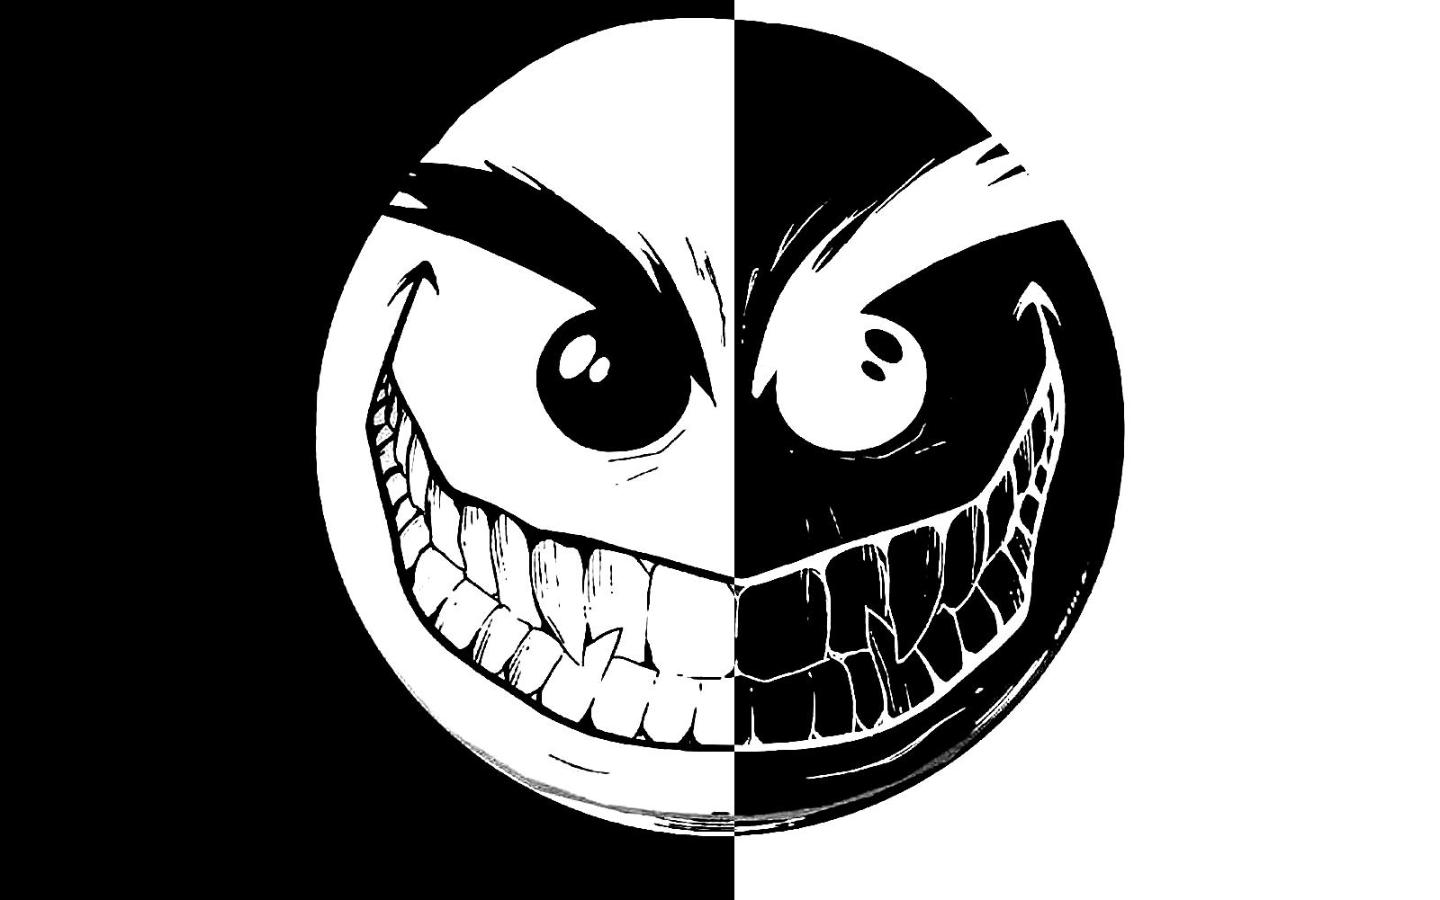 Smiley Face Dark Evil Smile Wallpaper - Search, discover and share your ...